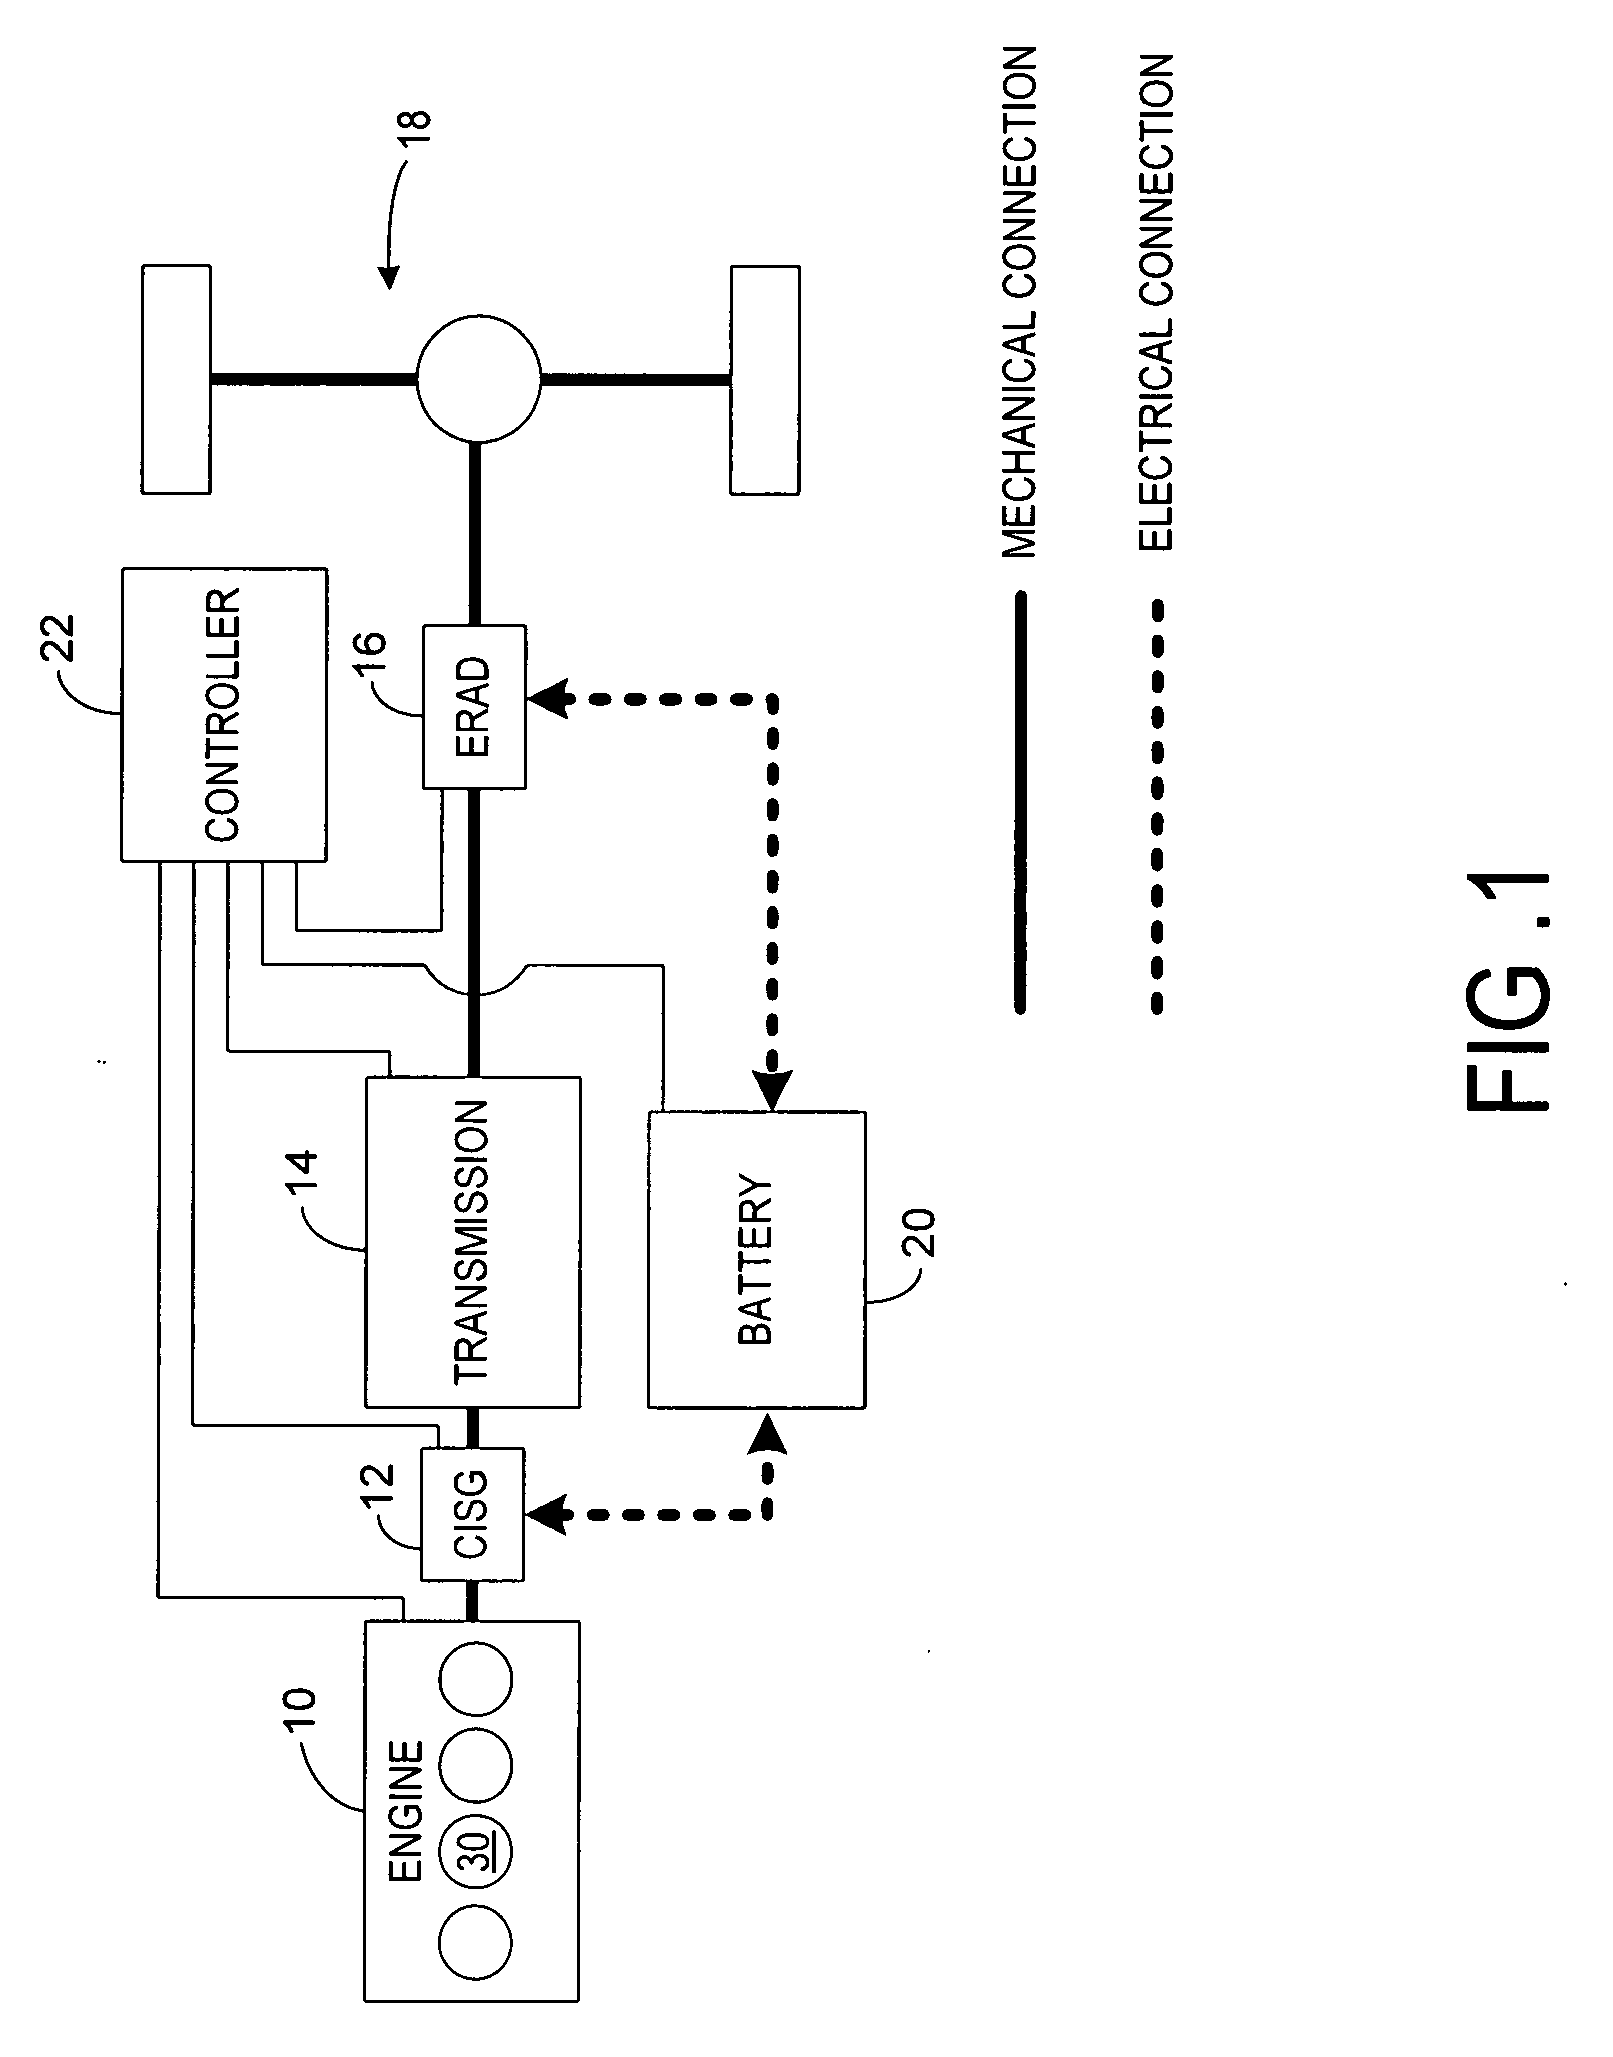 System and method of inhibiting the affects of driveline backlash in a hybrid propulsion system